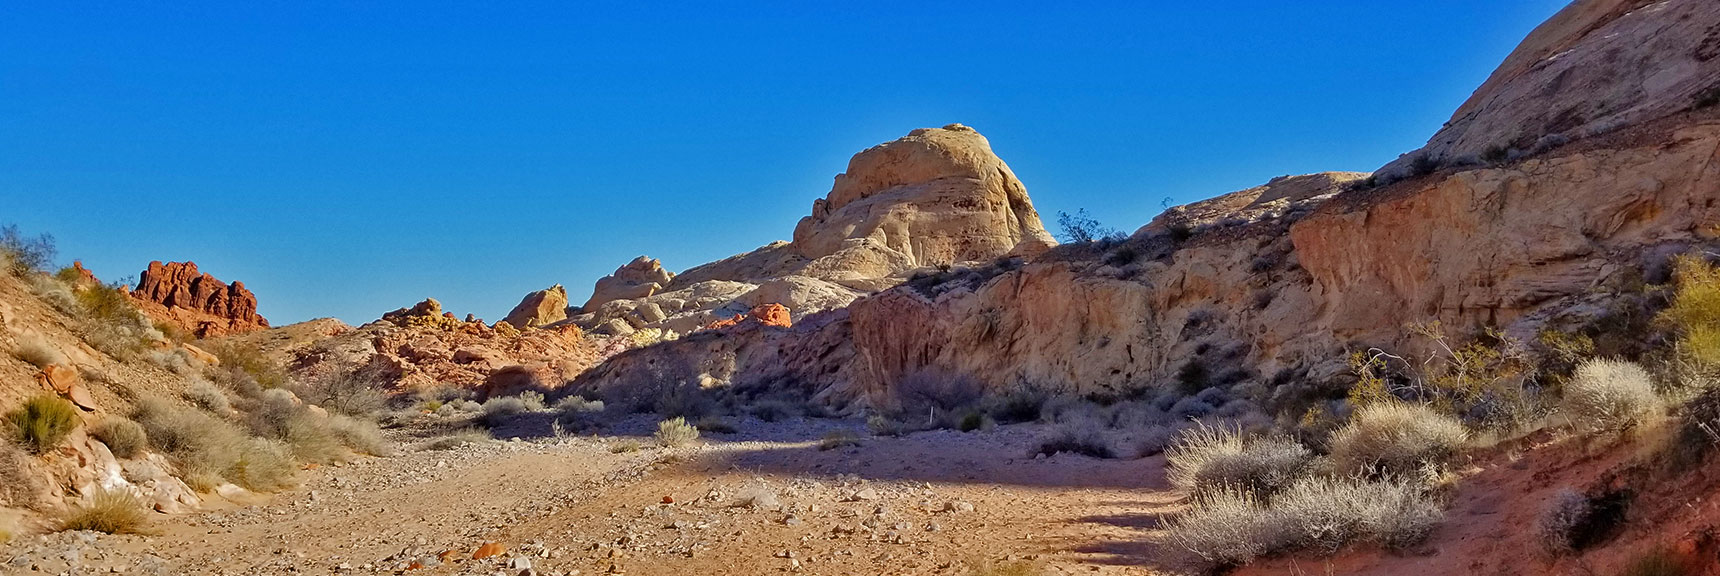 First Good View of White Domes Heading North on Prospect Trail in Valley of Fire State Park, Nevada